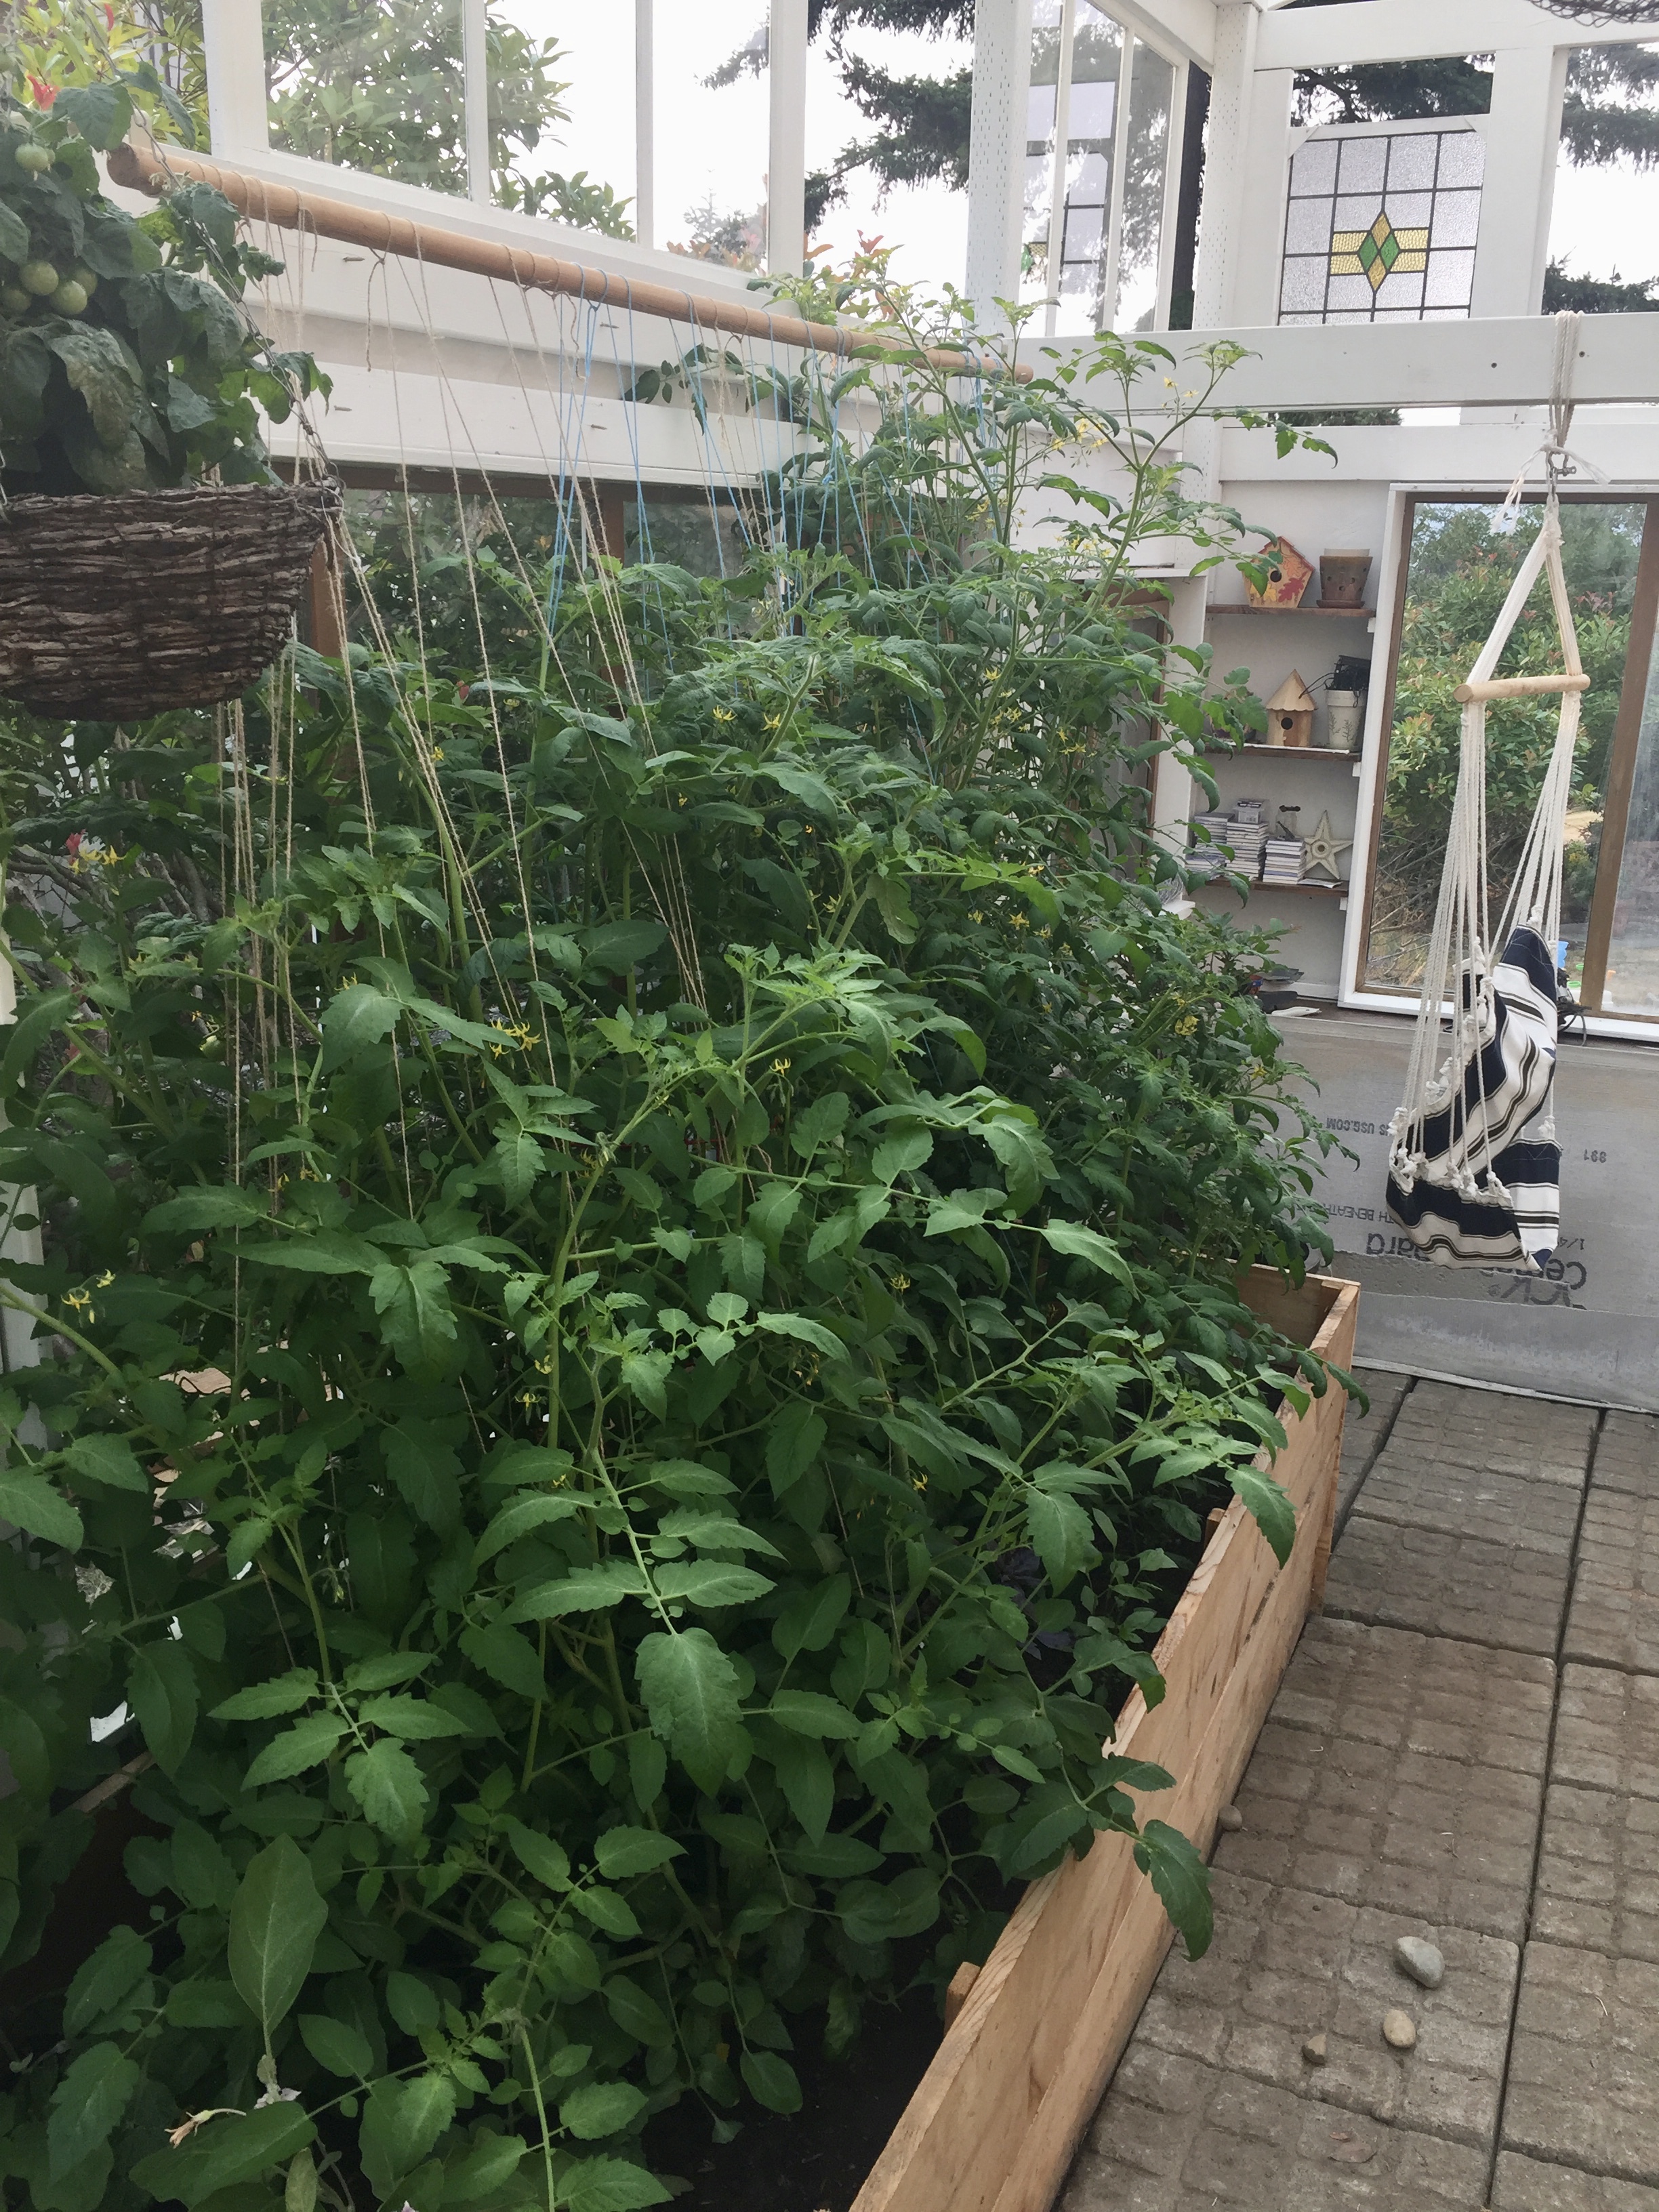  These tomatoes have been happy in their new home for about 2 weeks and they have tripled in size! &nbsp;I installed a closet rod with brackets above the tomatoes so I could string them up and take advantage of our vertical space. &nbsp;They seem sup